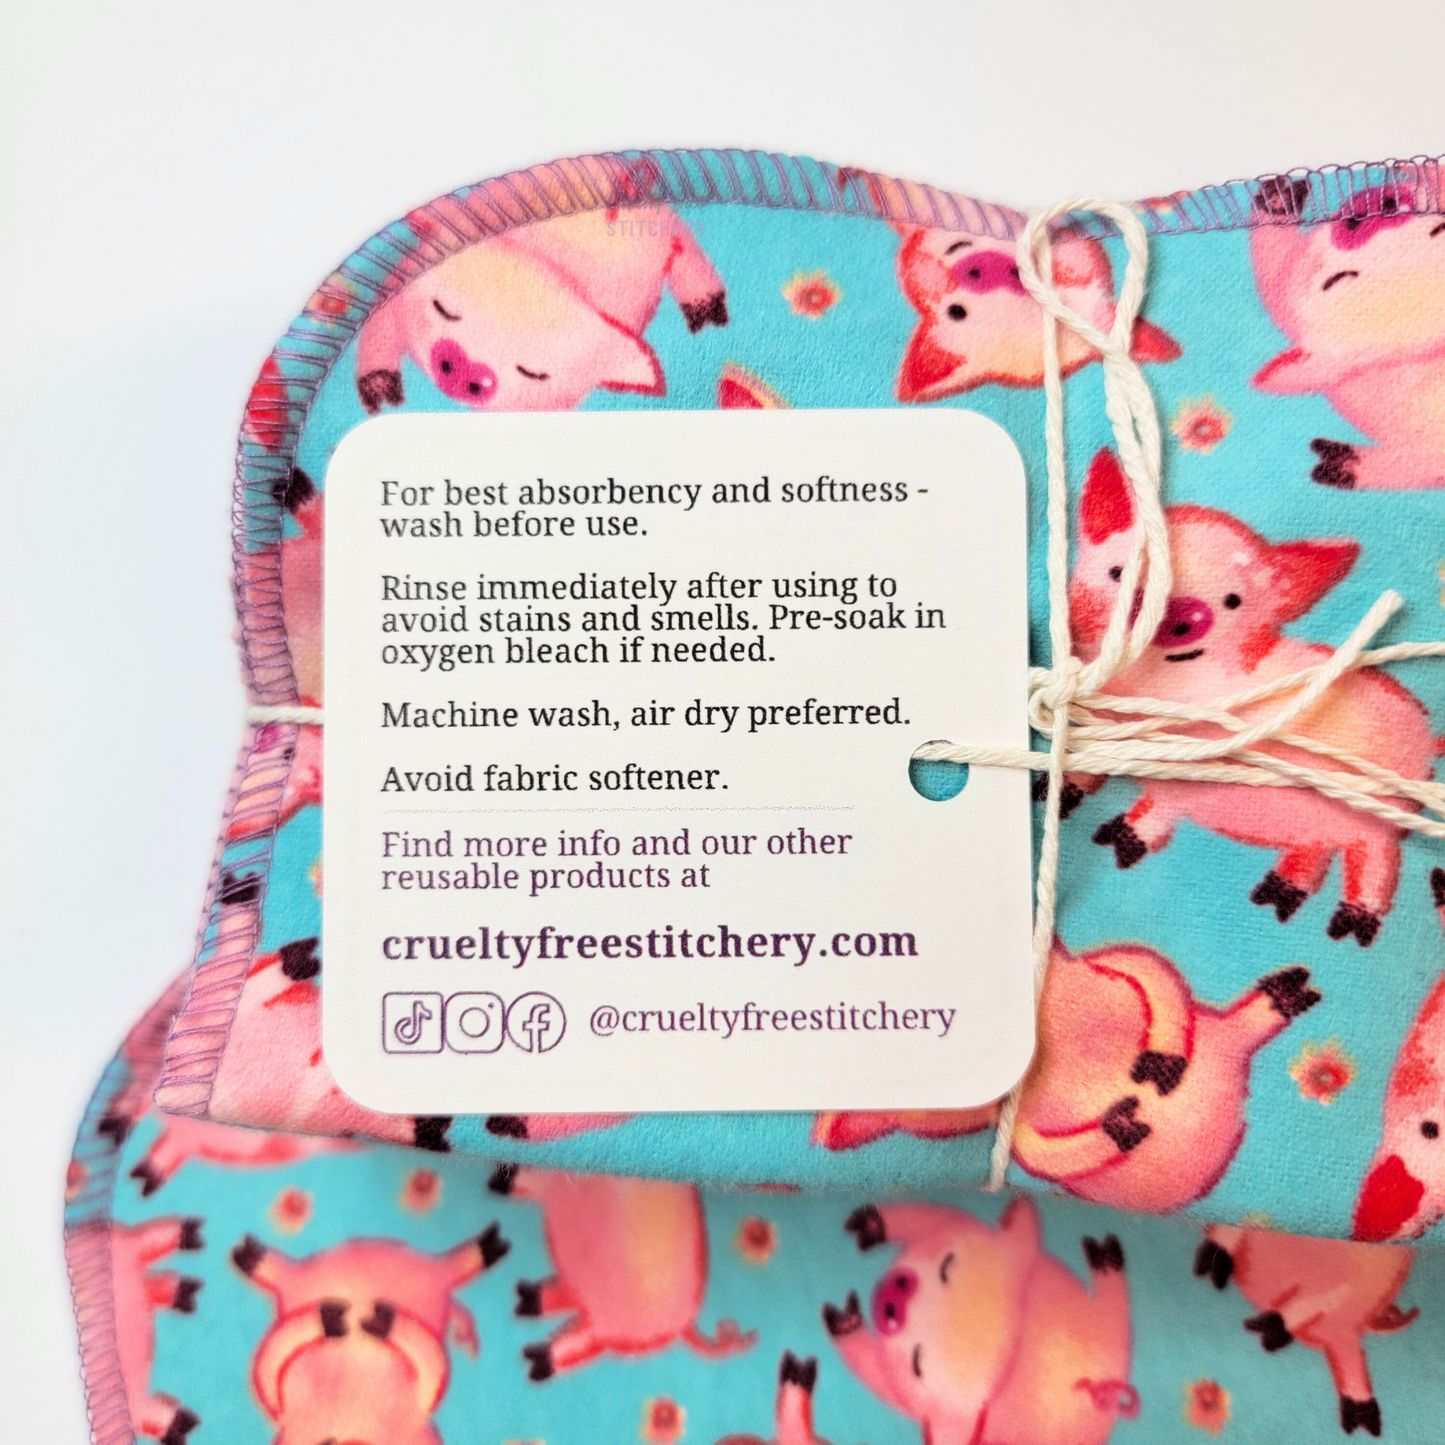 The back of the cloth wipes tag with care instructions and our shop info.